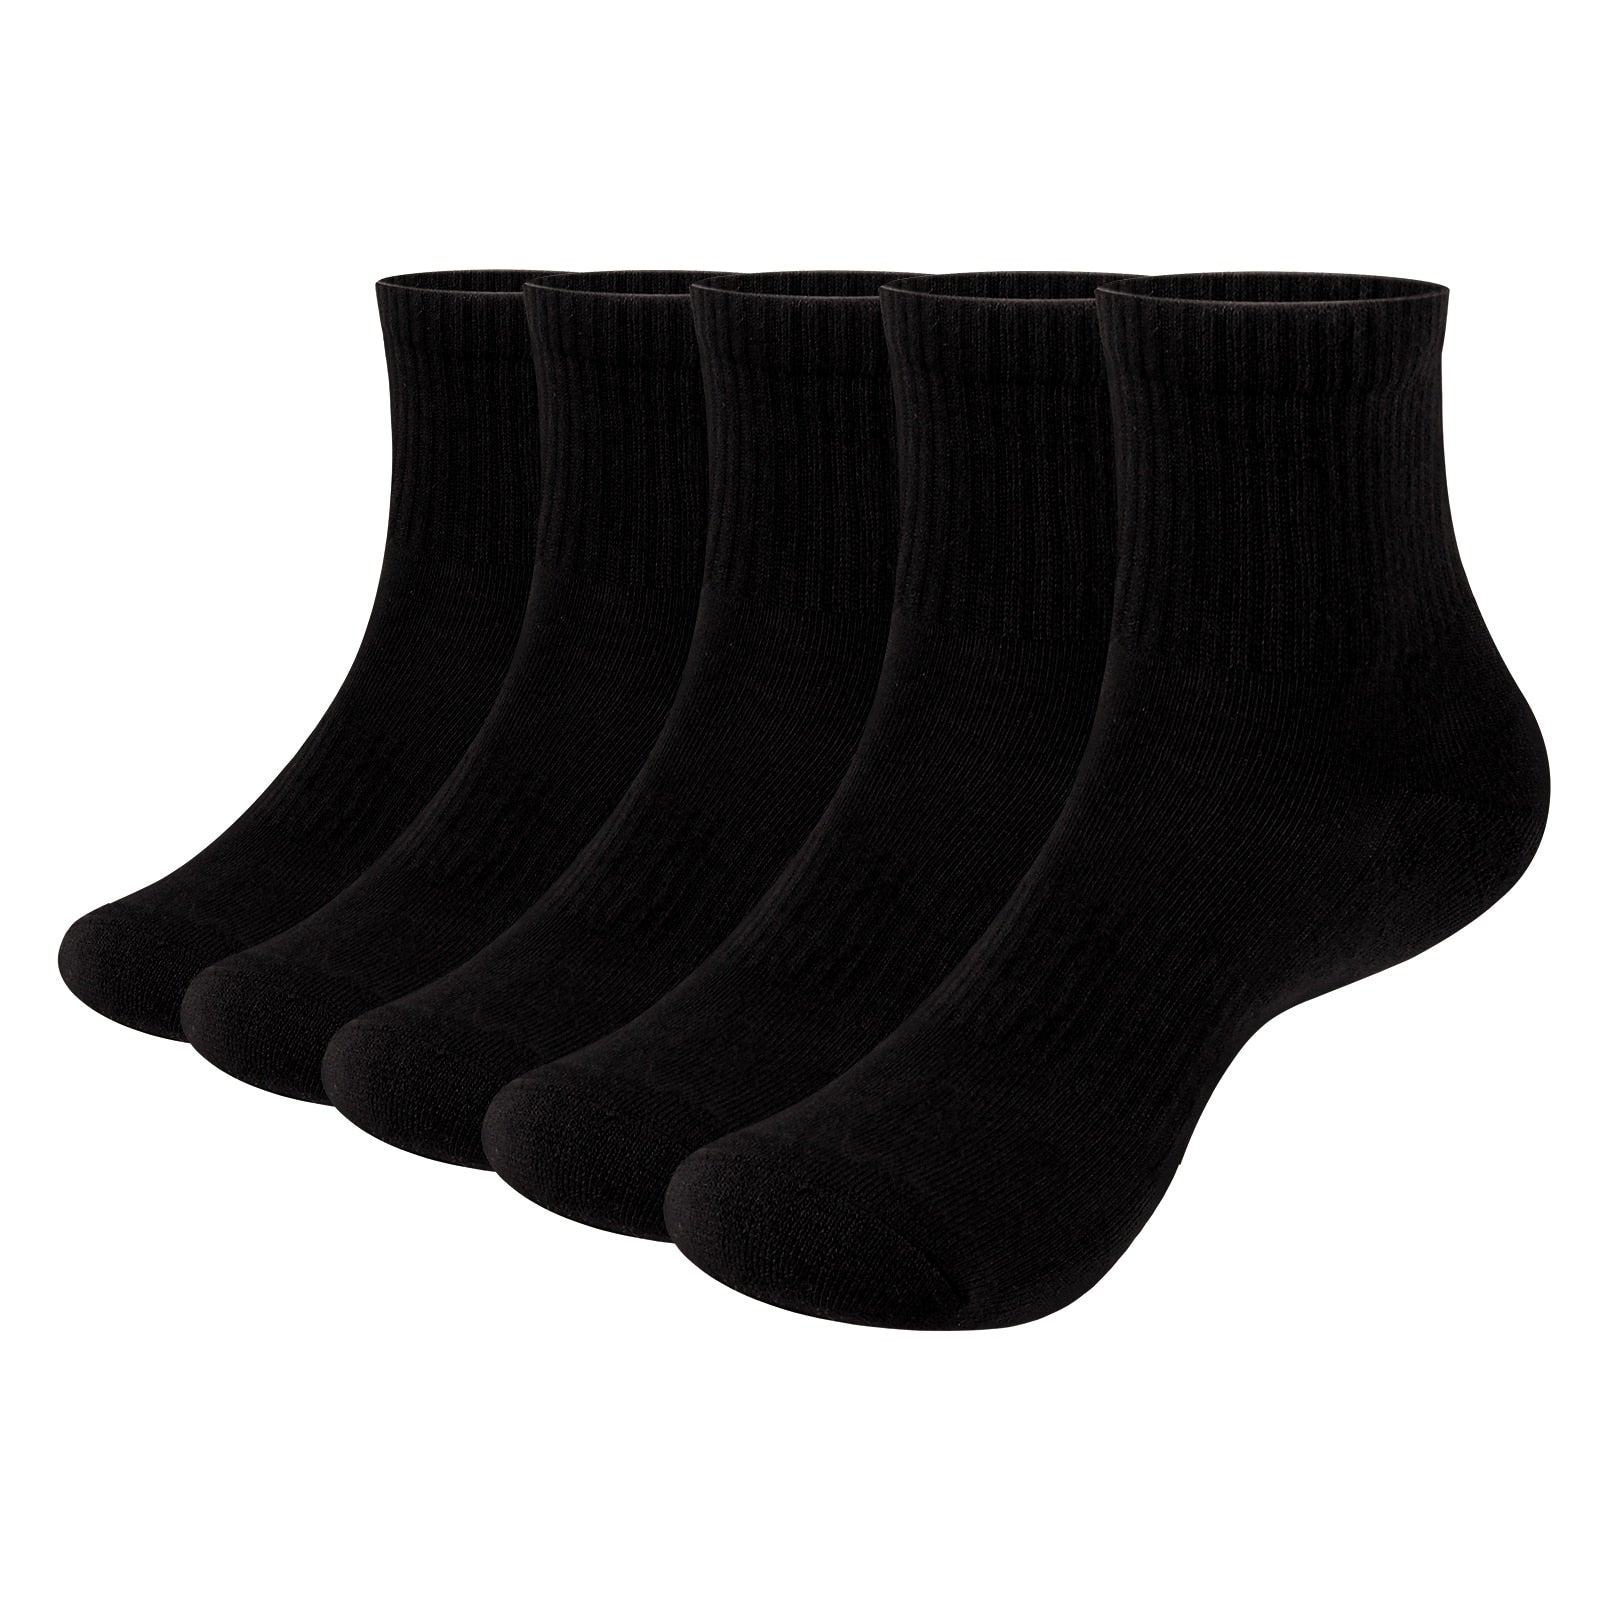 Men Moisture Wicking Fitness Training Athletic Socks Combed Cotton Cushioned Mid Calf